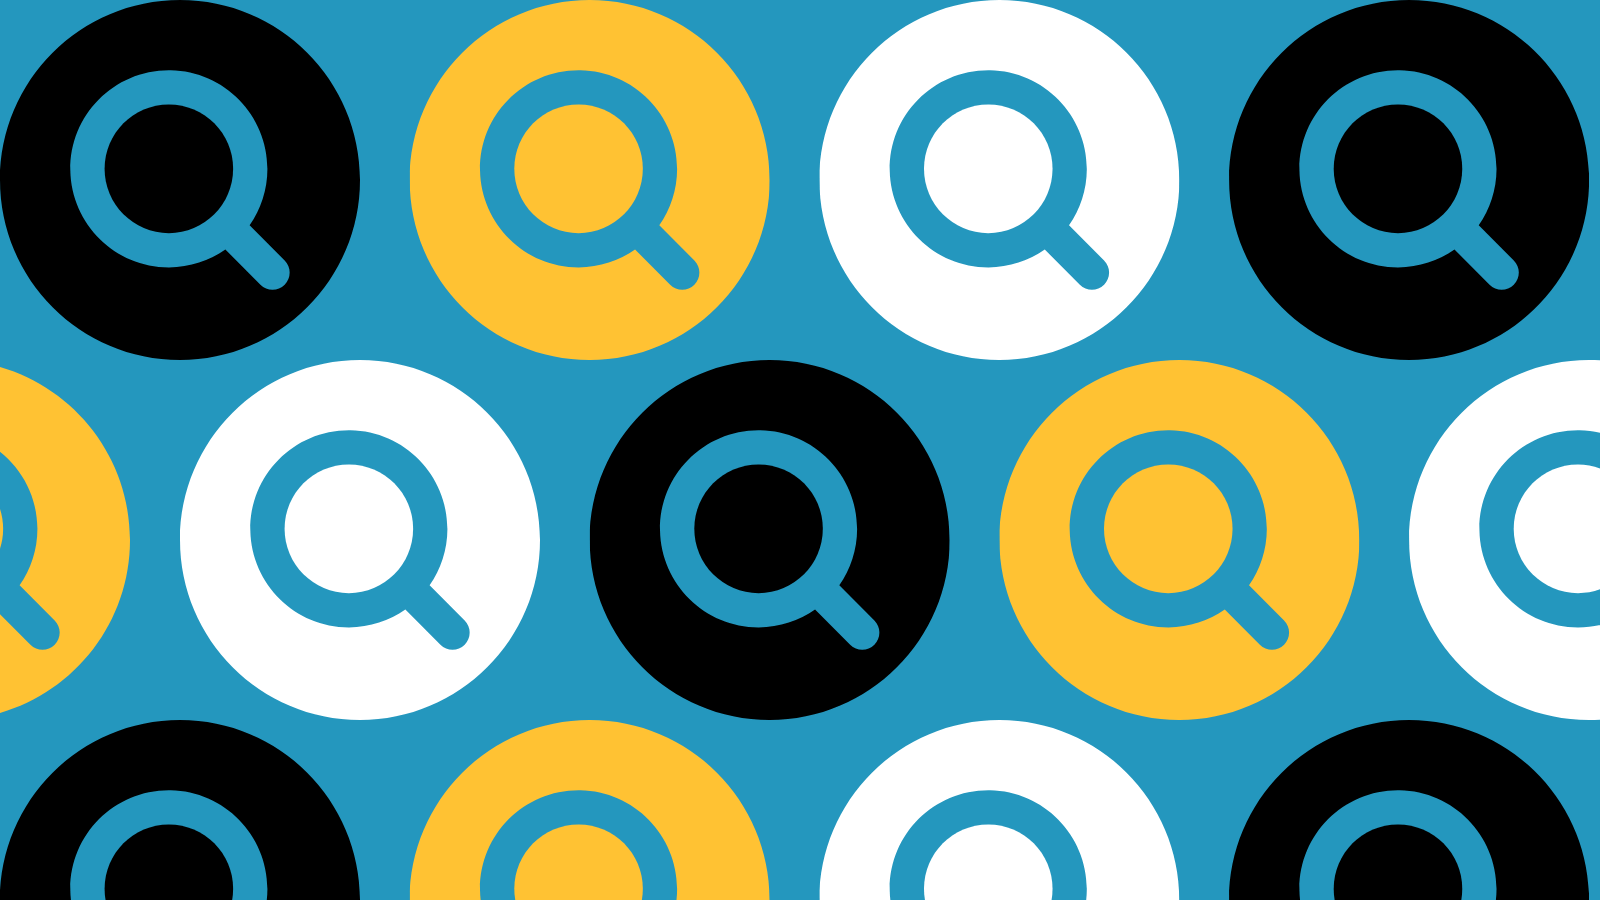 A repeating pattern of magnifying glass icons